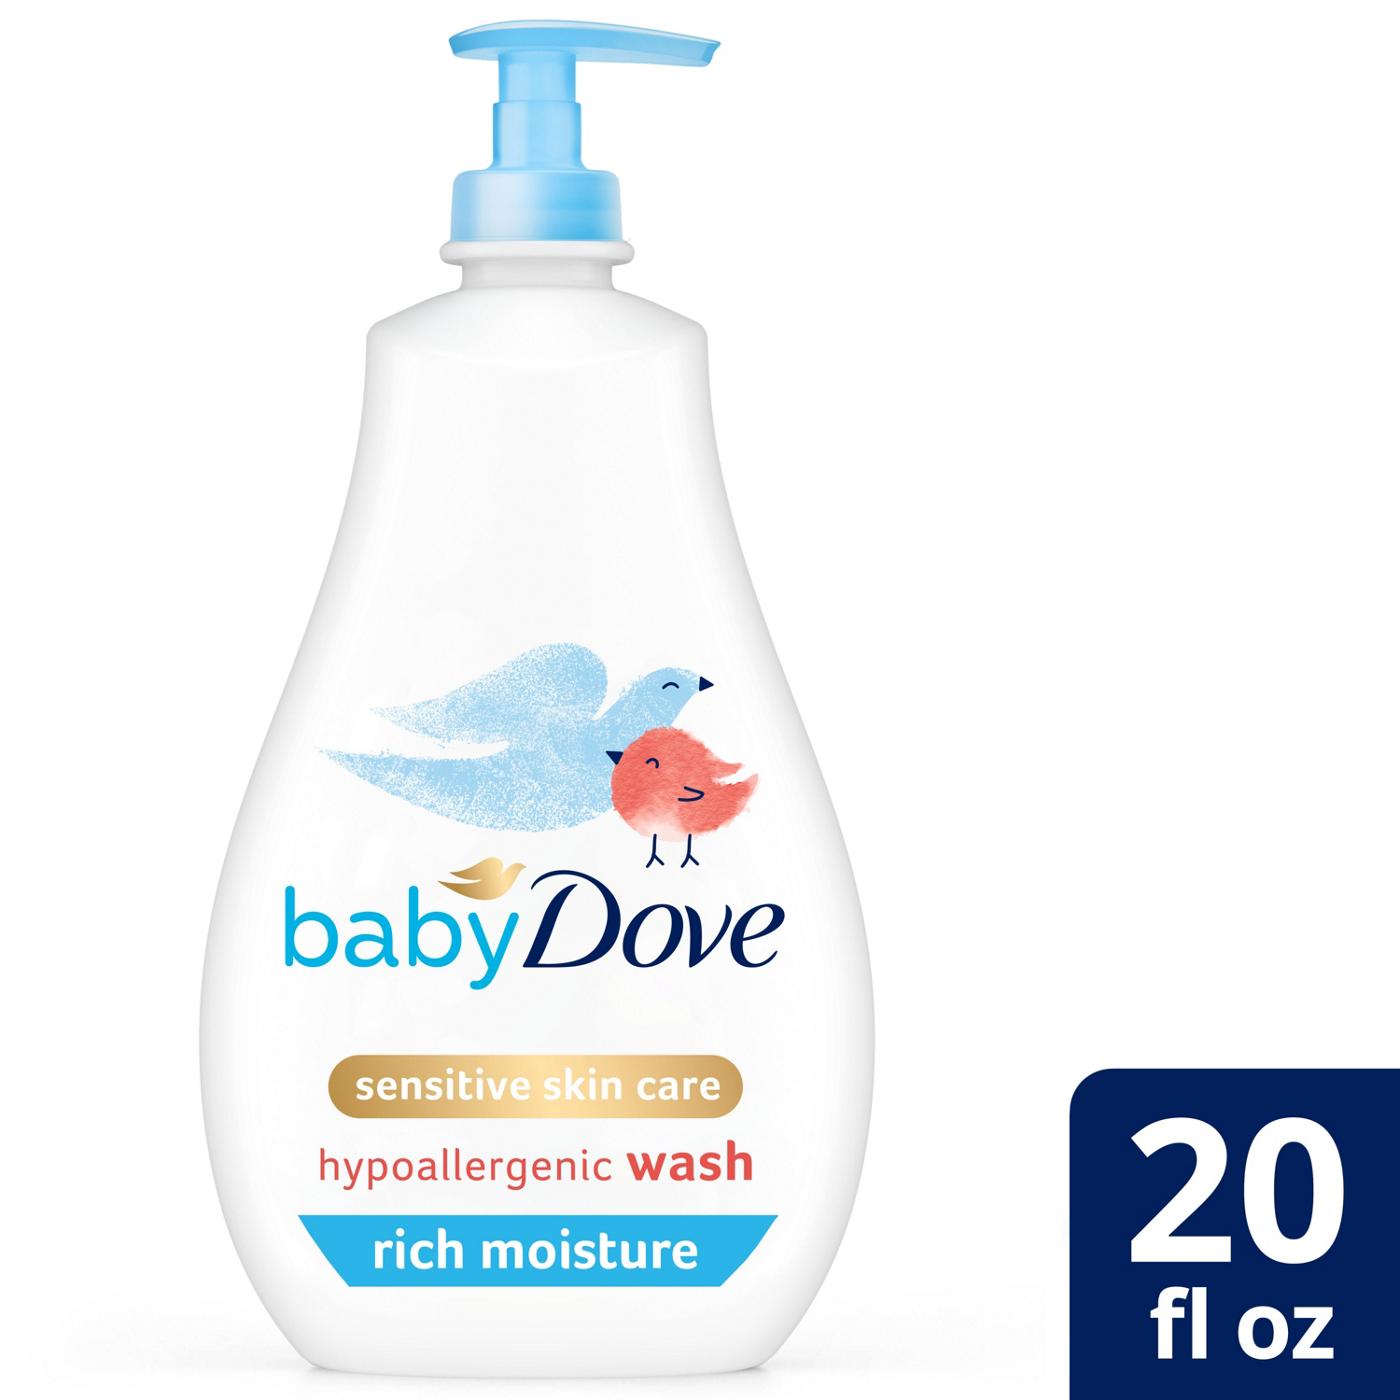 Baby Dove Sensitive Skin Care Baby Wash Rich Moisture; image 4 of 11